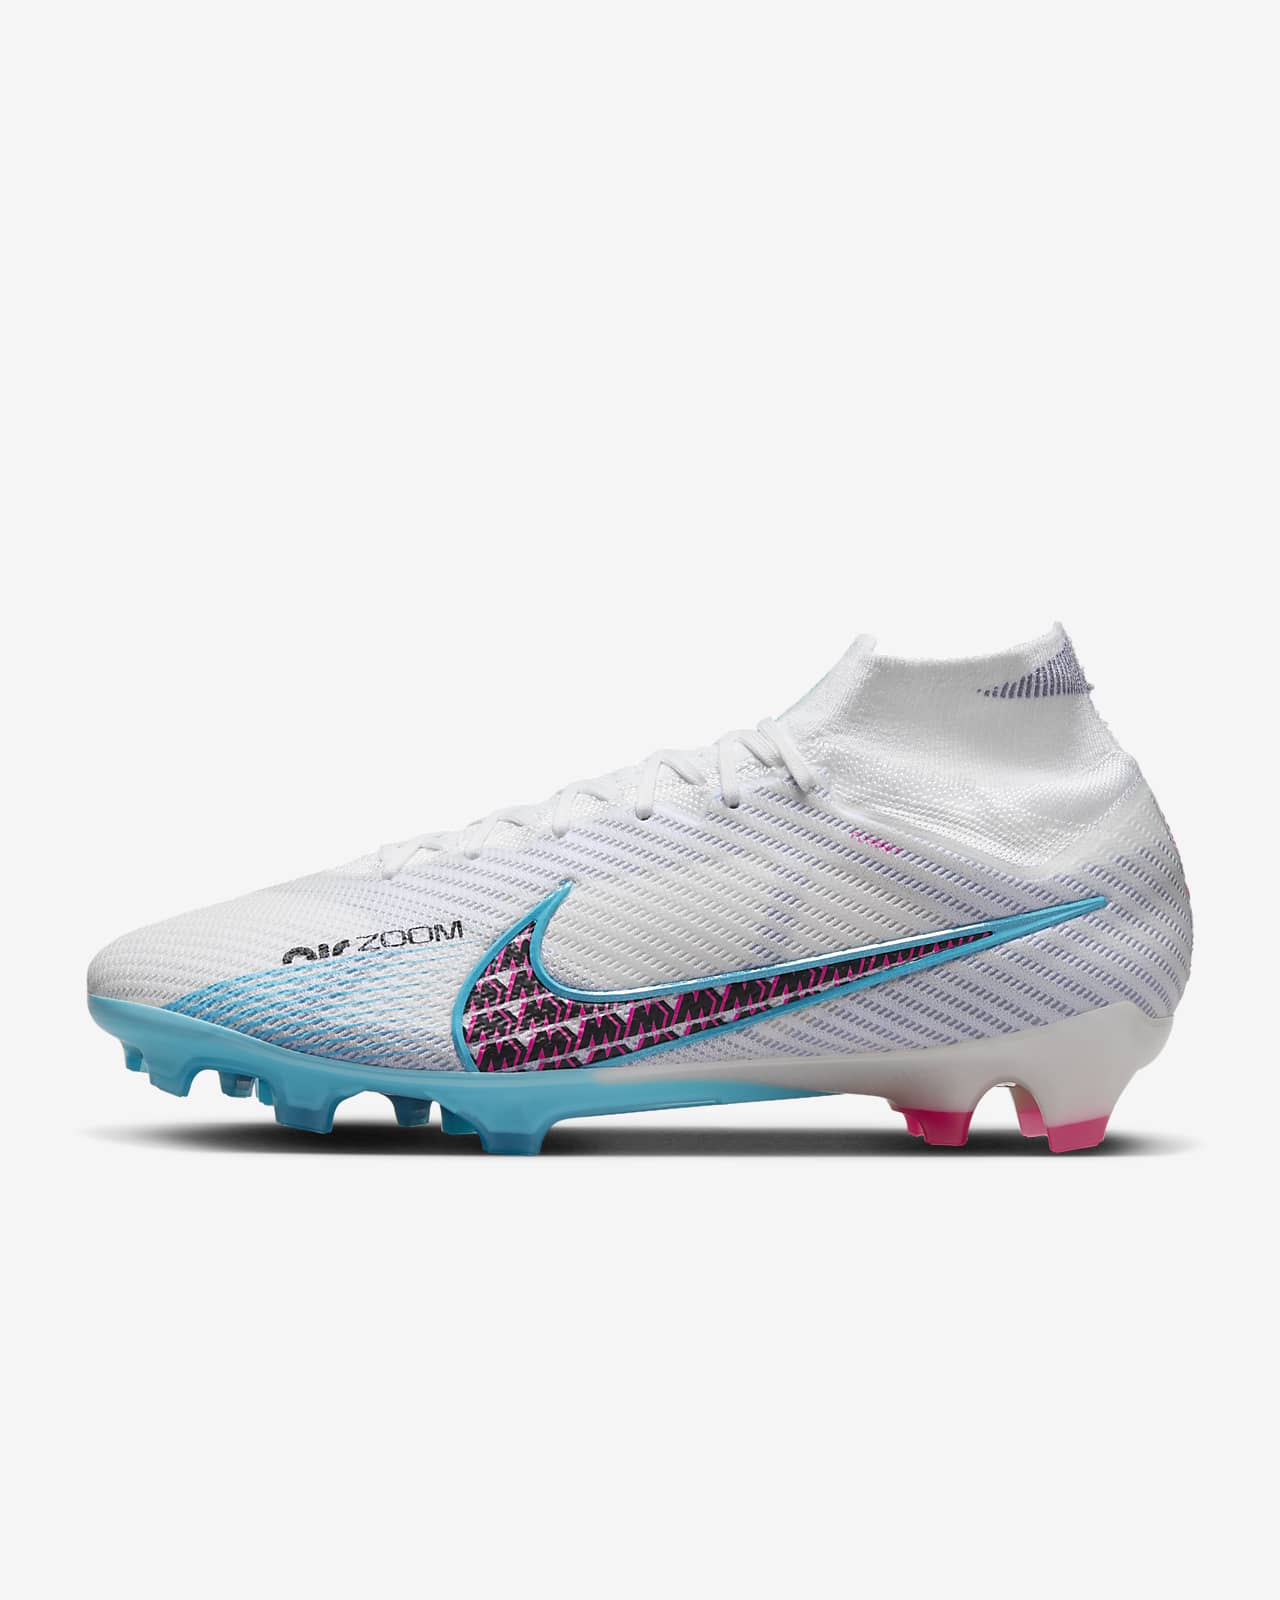 seguro hacer los deberes Ídolo Nike Mercurial Superfly 9 Elite Firm-Ground Soccer Cleats. Nike.com